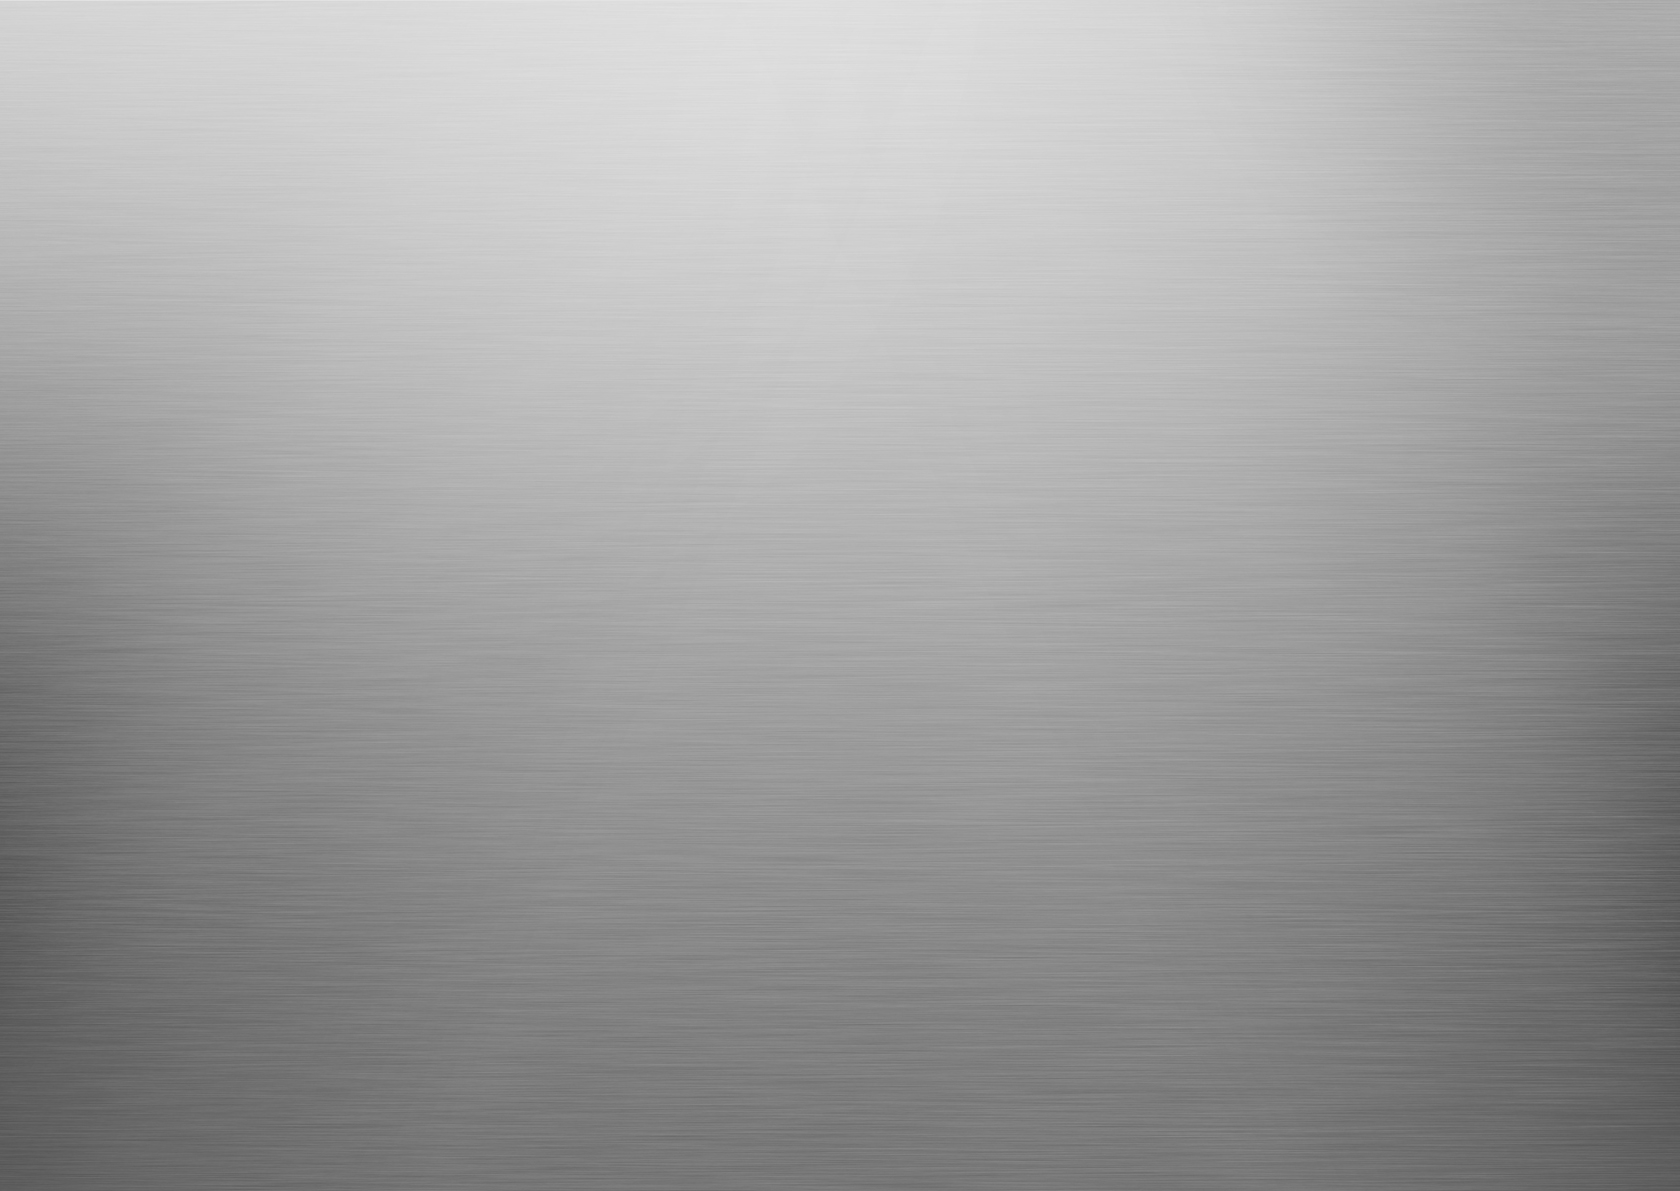 Home Backgrounds Hd Brushed Steel Metal Texture Wallpaper For Ipad 1680x1191